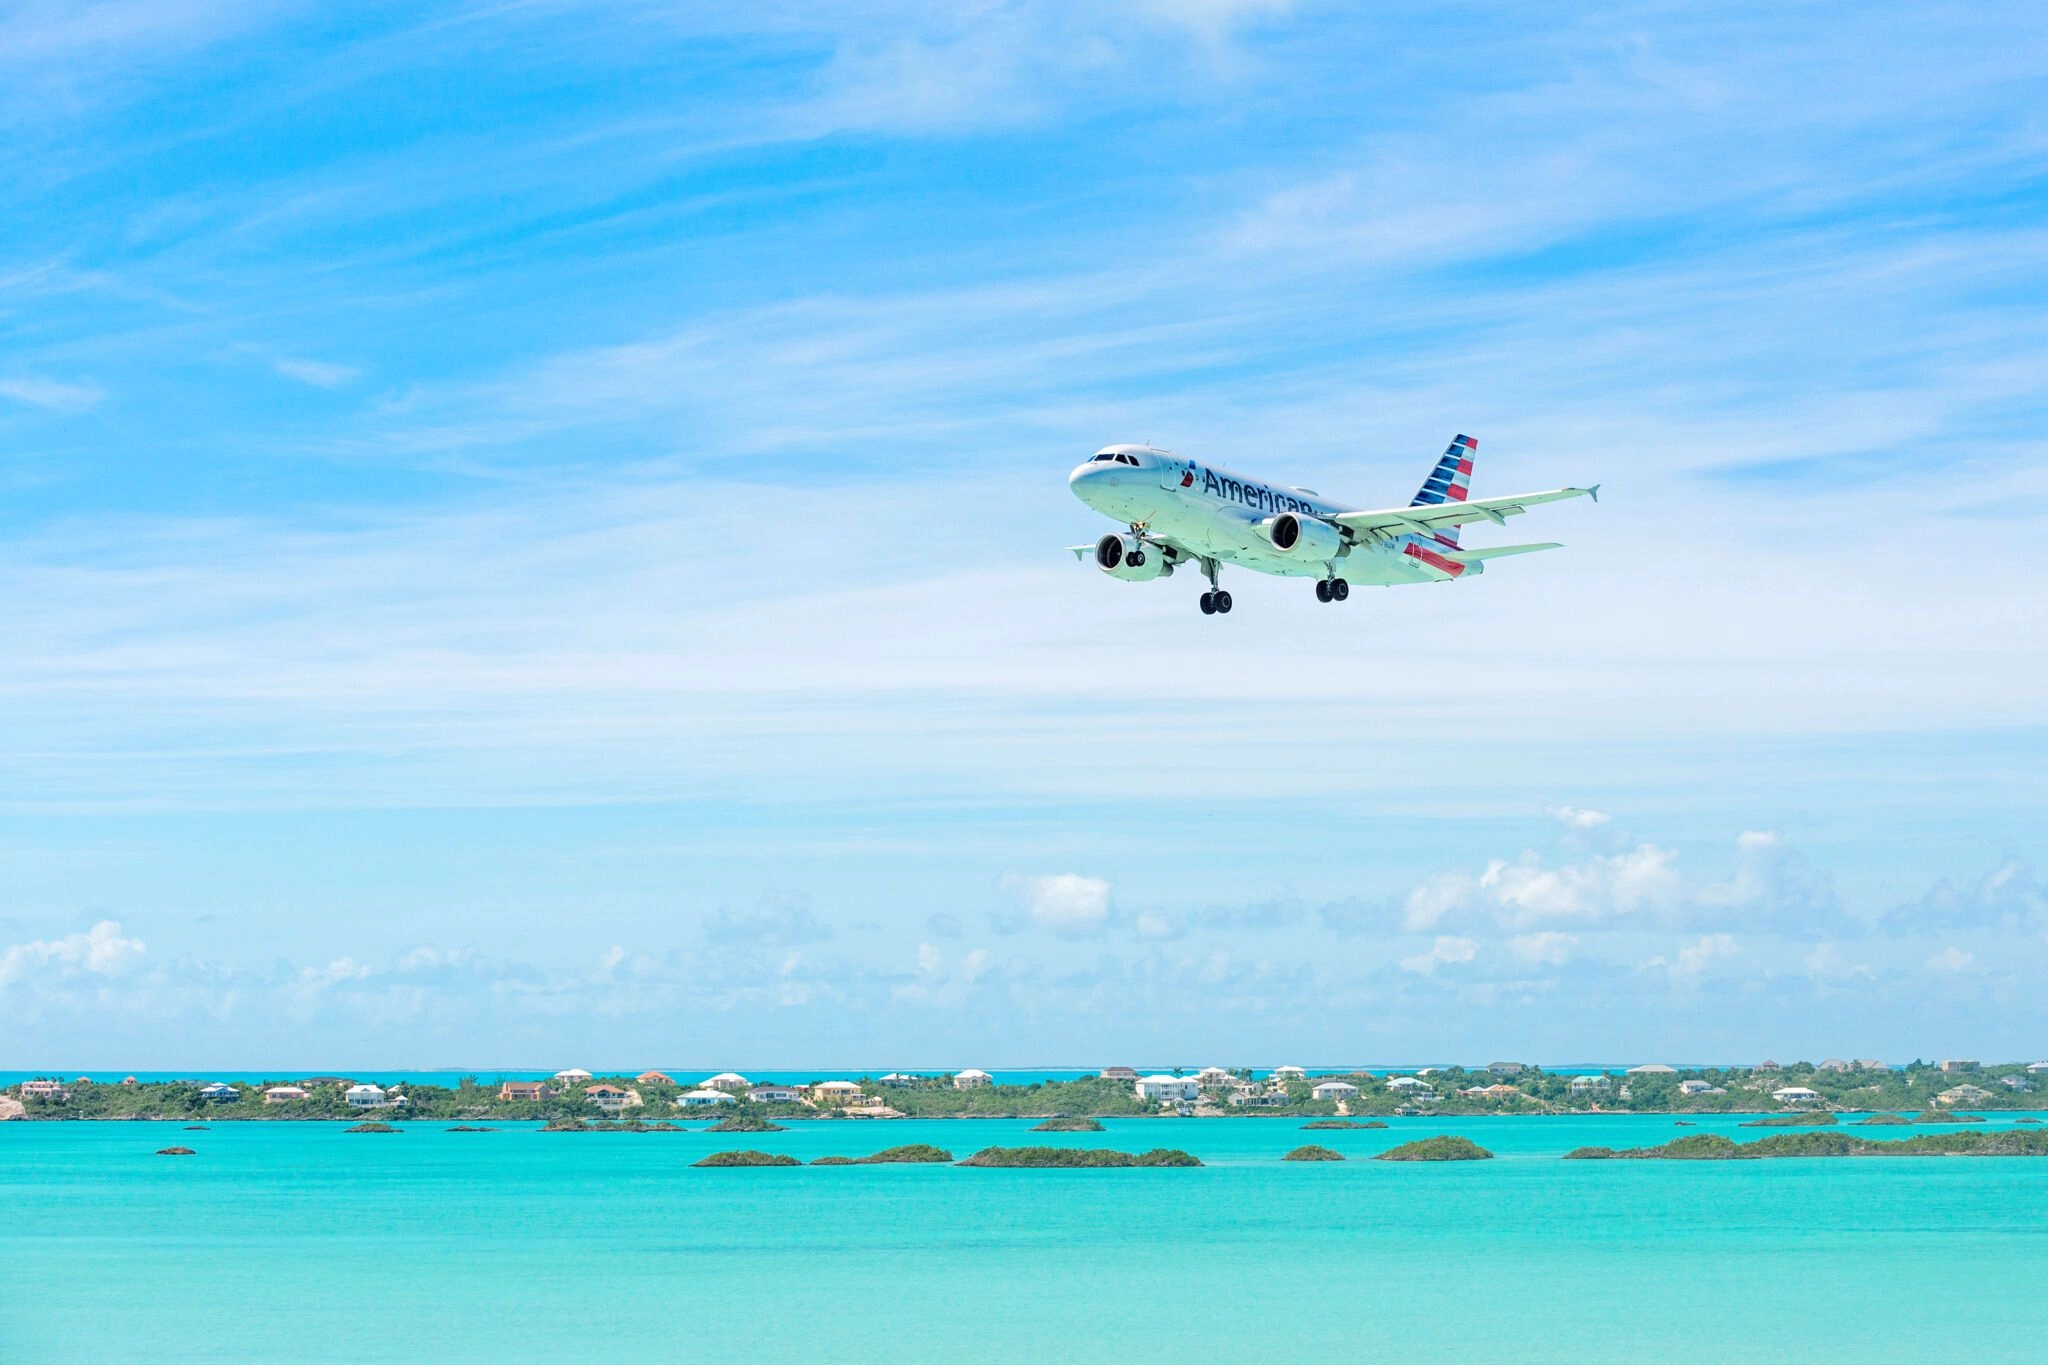 Getting to Turks and Caicos by Air